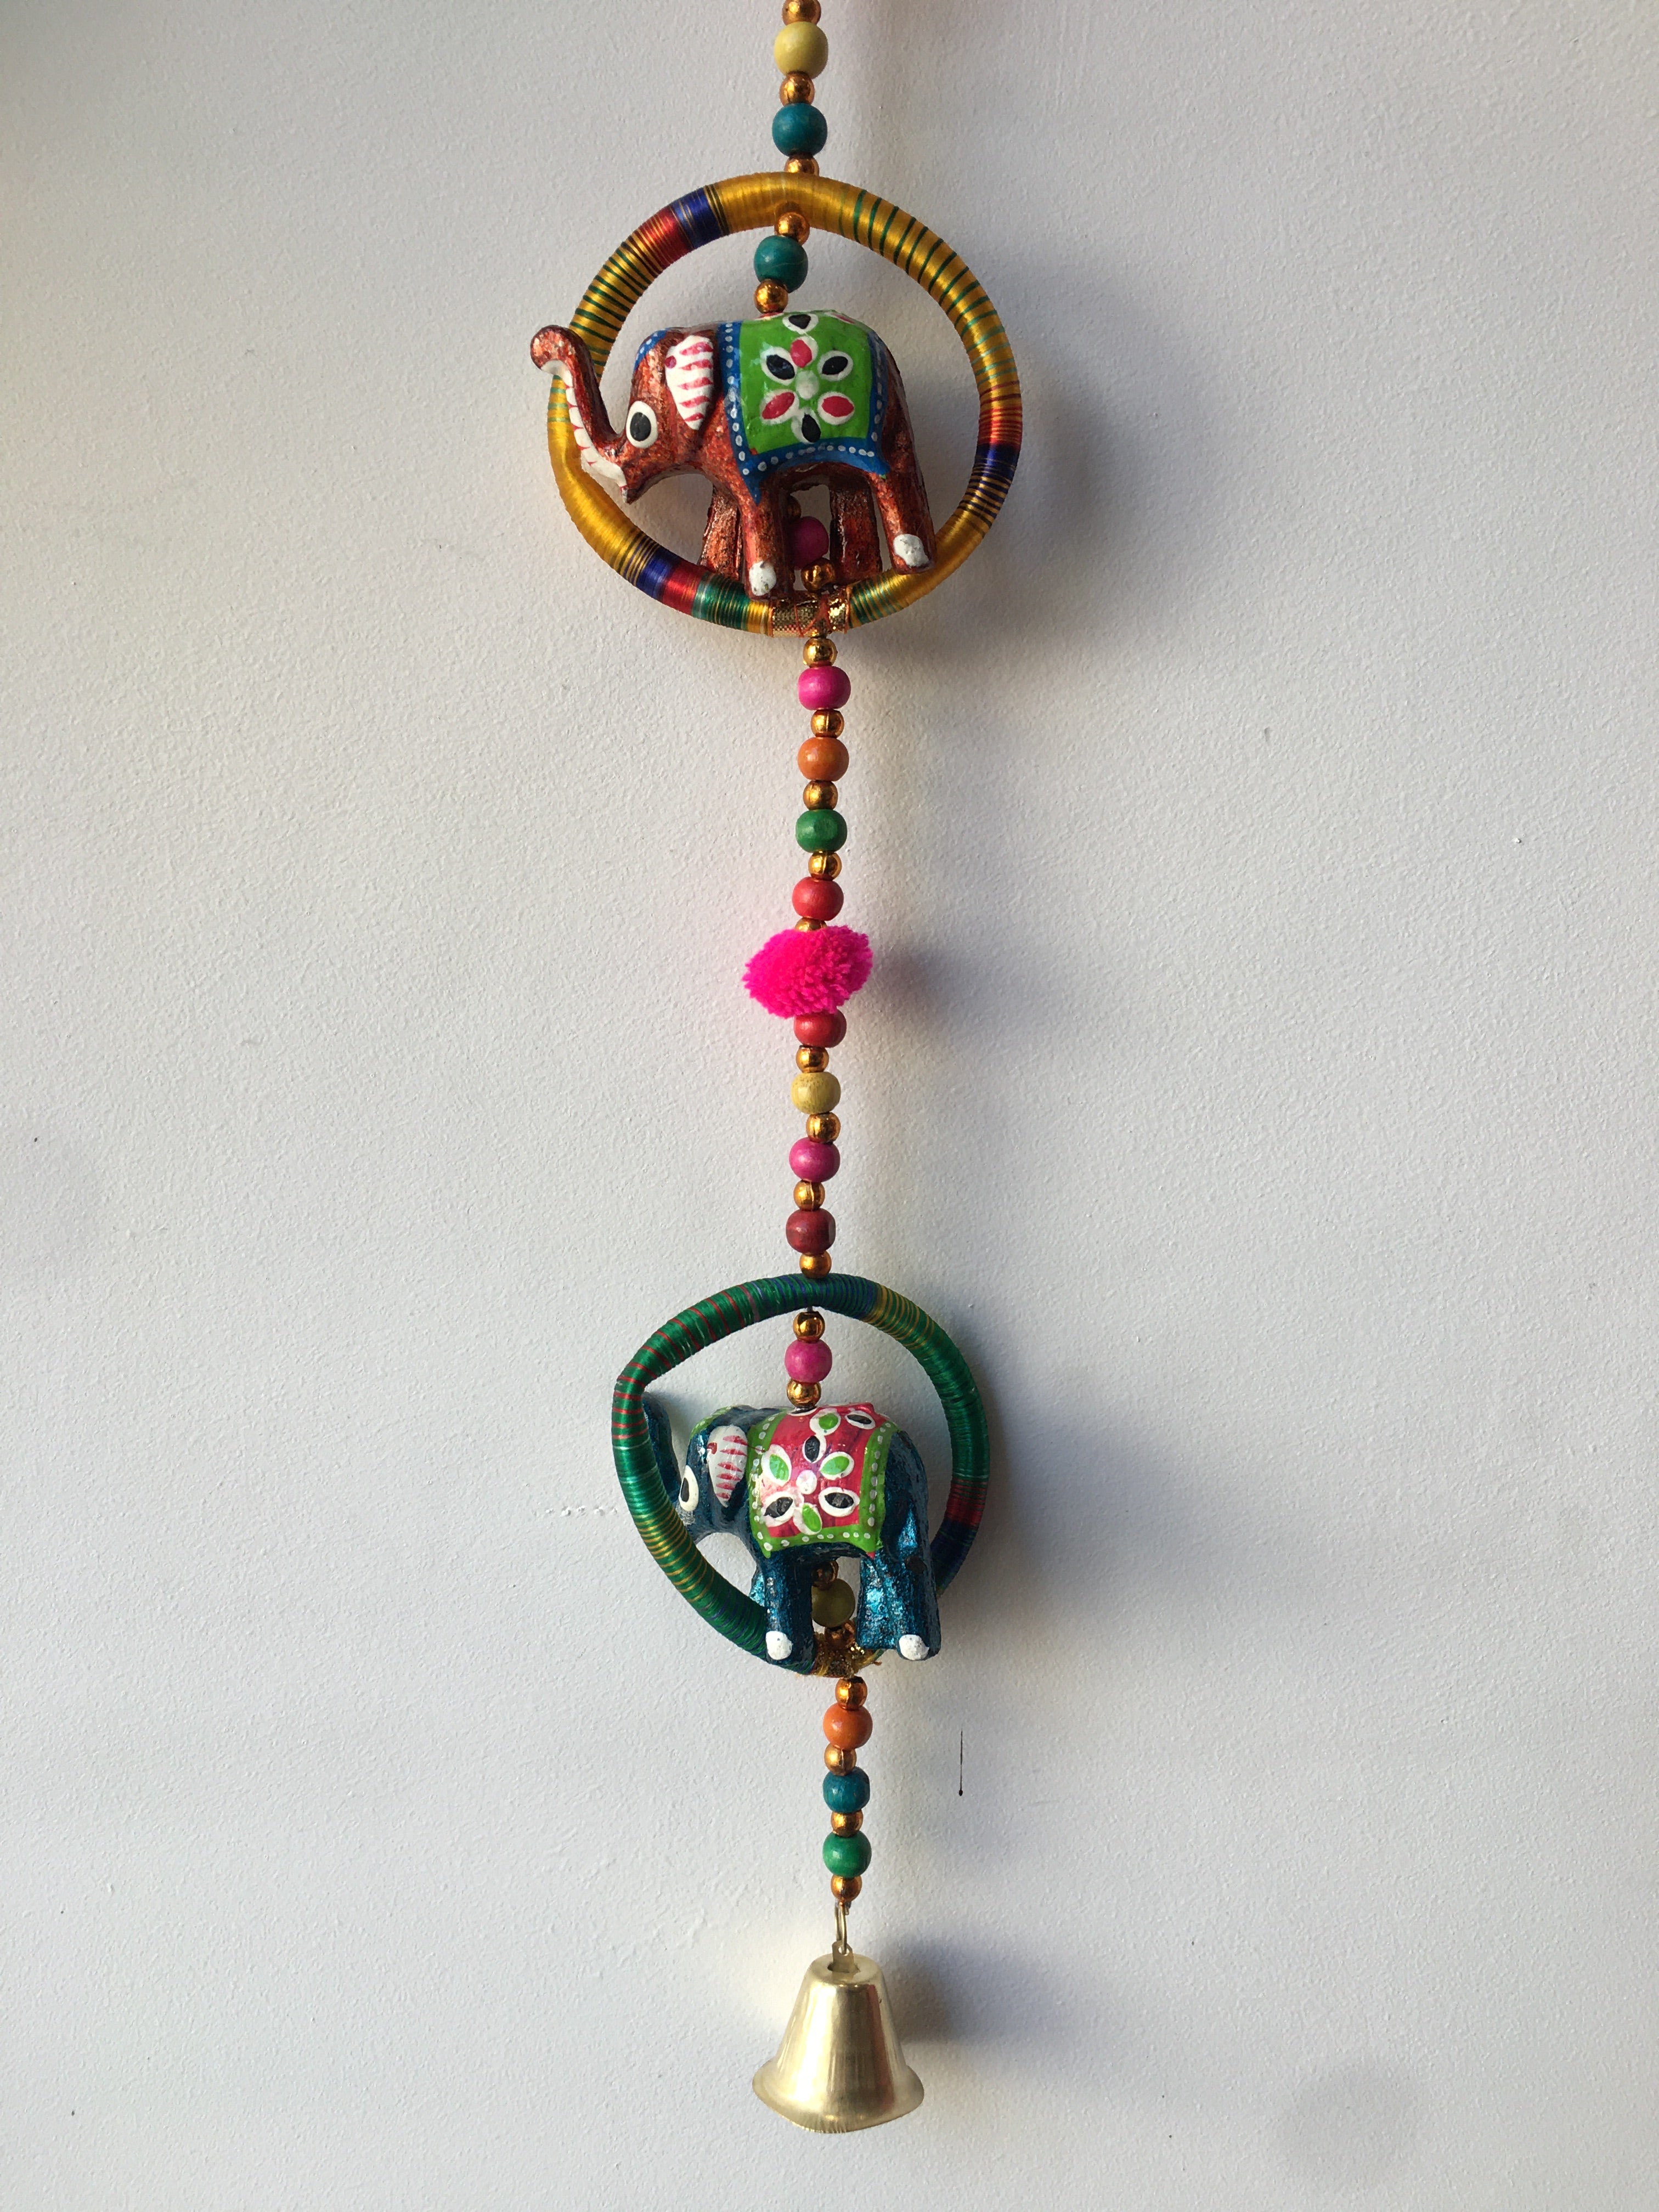 HANGING INDIAN ELEPHANTS IN 5 HOOPS DECORATION/MOBILE